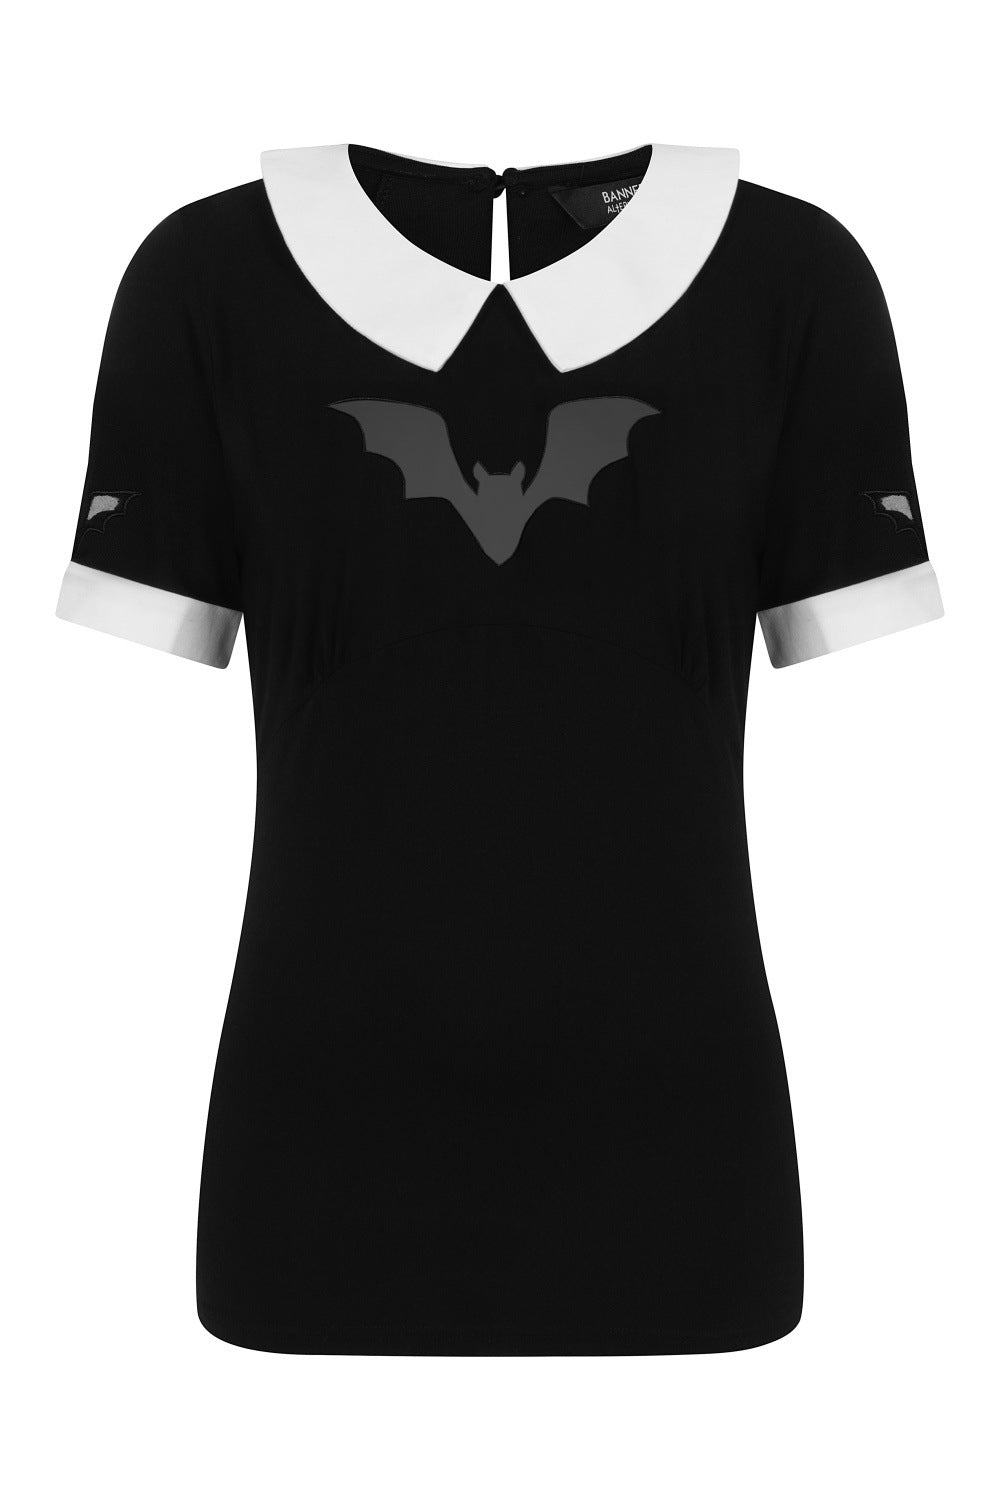 Black top with contrast collar and mesh bat panel 